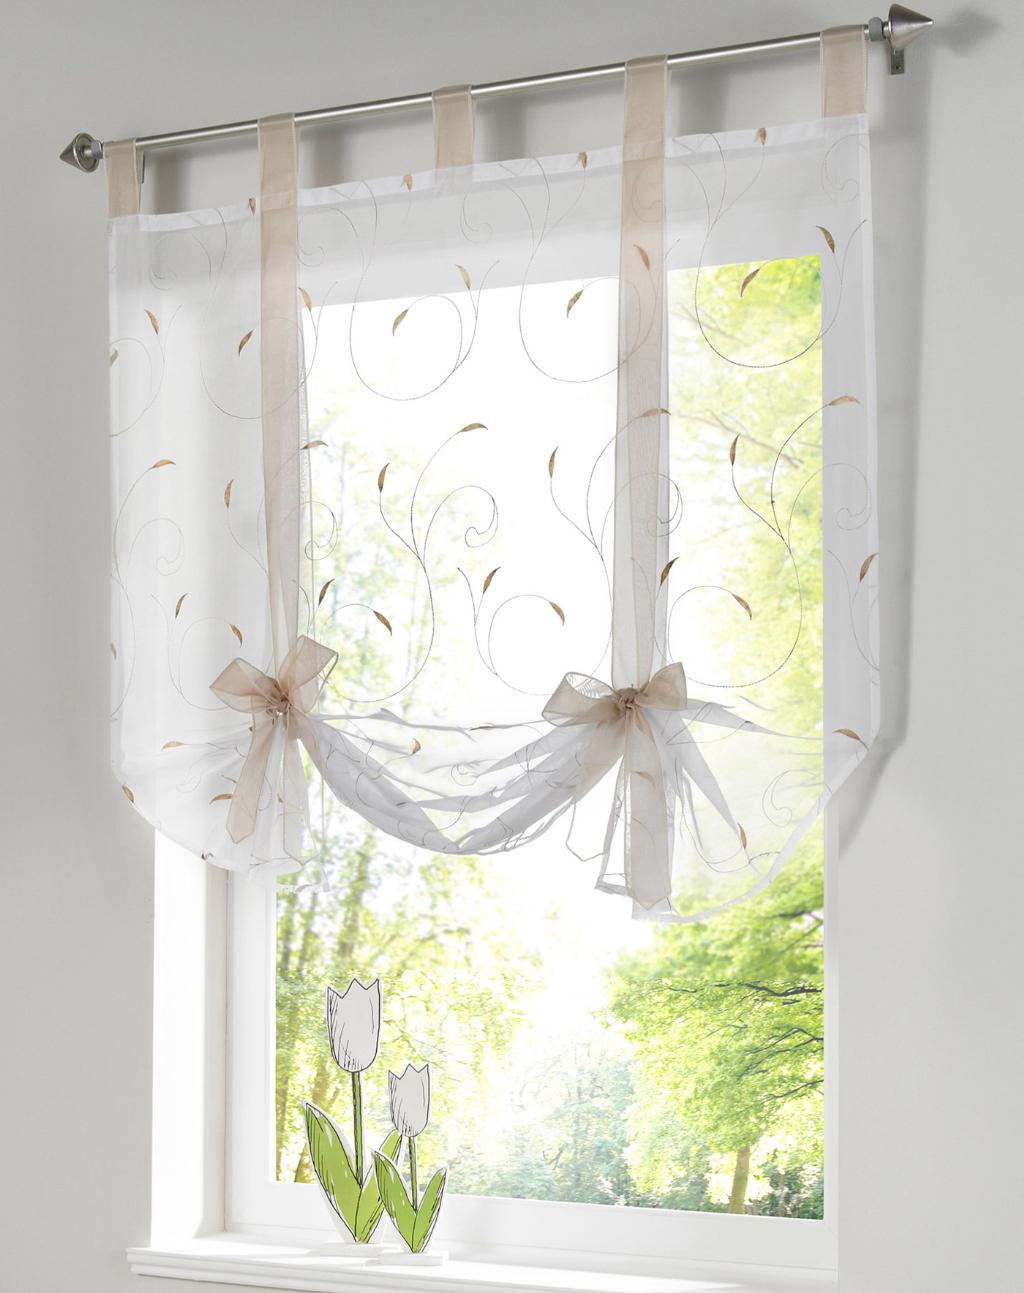 tulle-streamers-embroidery-patterns-roman-blinds-curtains-for-kitchen-bedroom-living-room-window-decorative